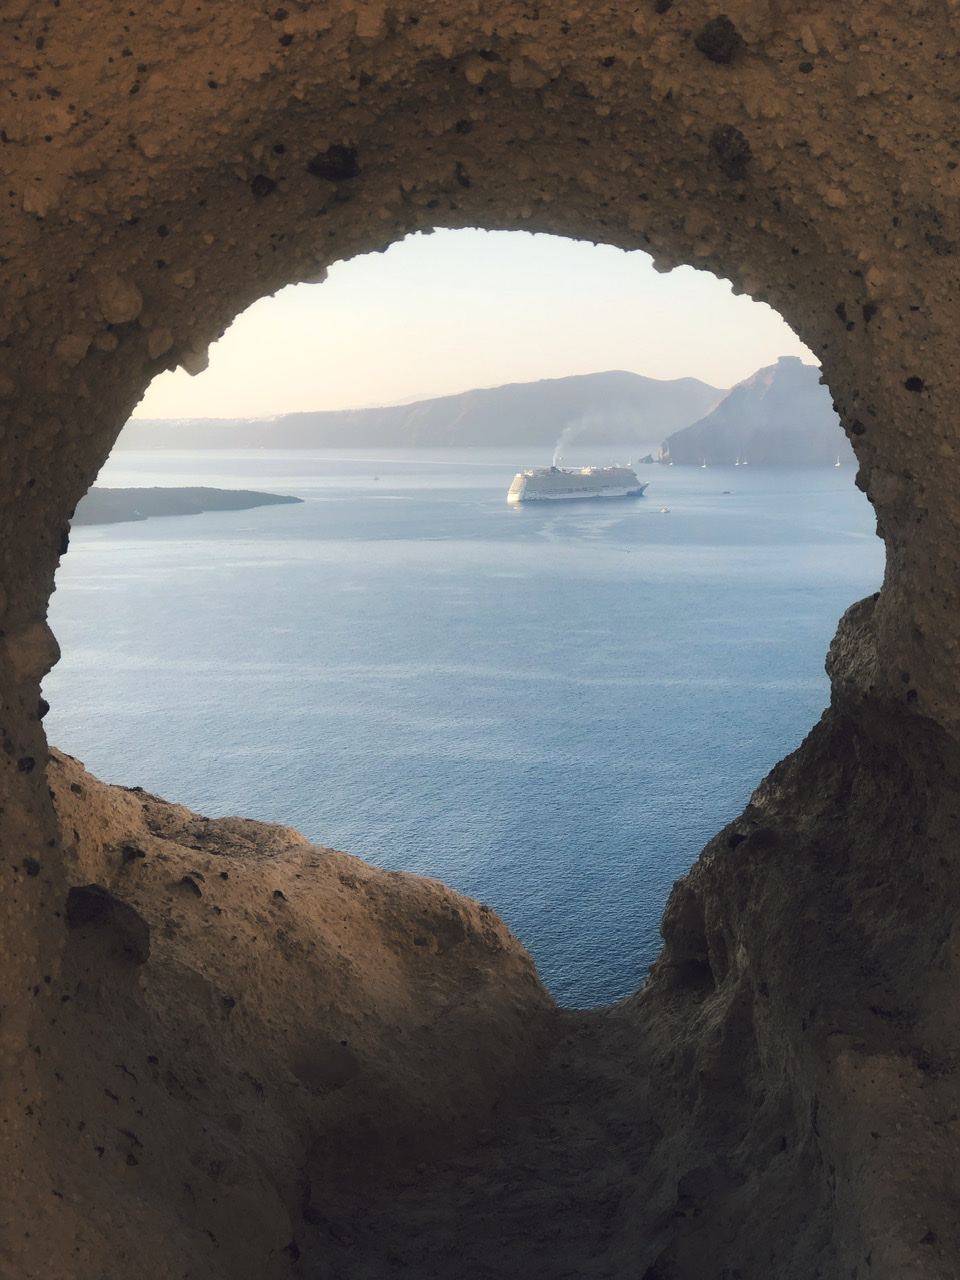 cruise ship at sea with volcanic greek islands in background pictured through heart shaped hole in rock in santorini